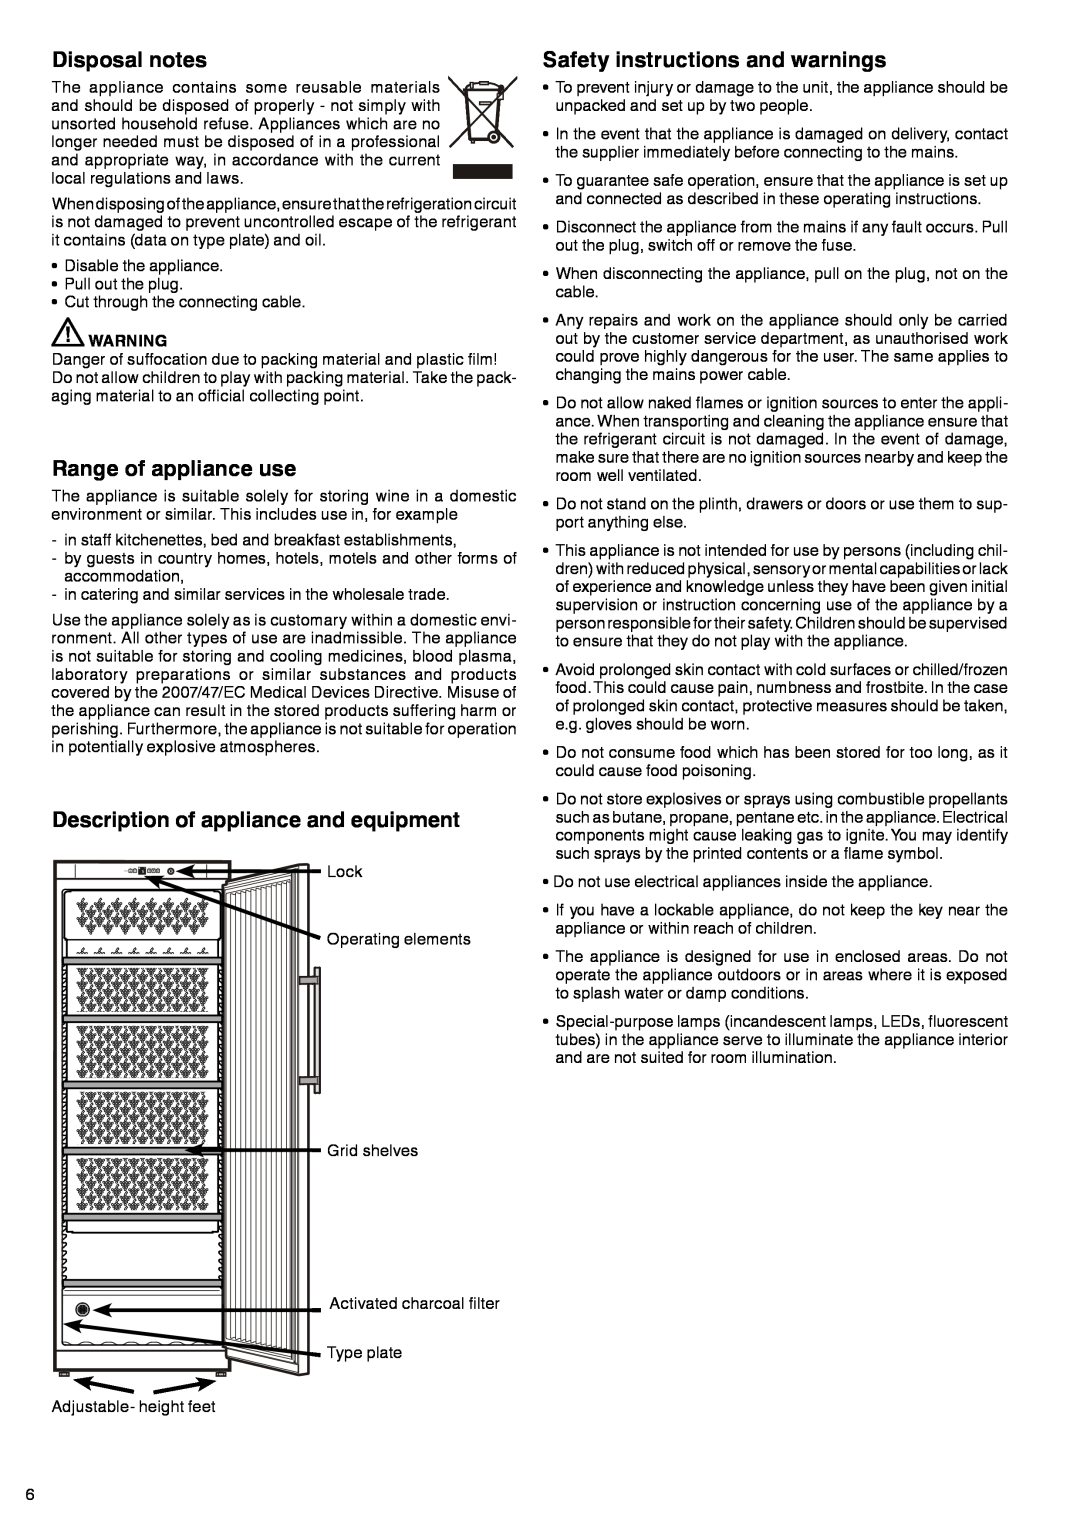 Liebherr 7081 203-00 manual Disposal notes, Range of appliance use, Description of appliance and equipment 